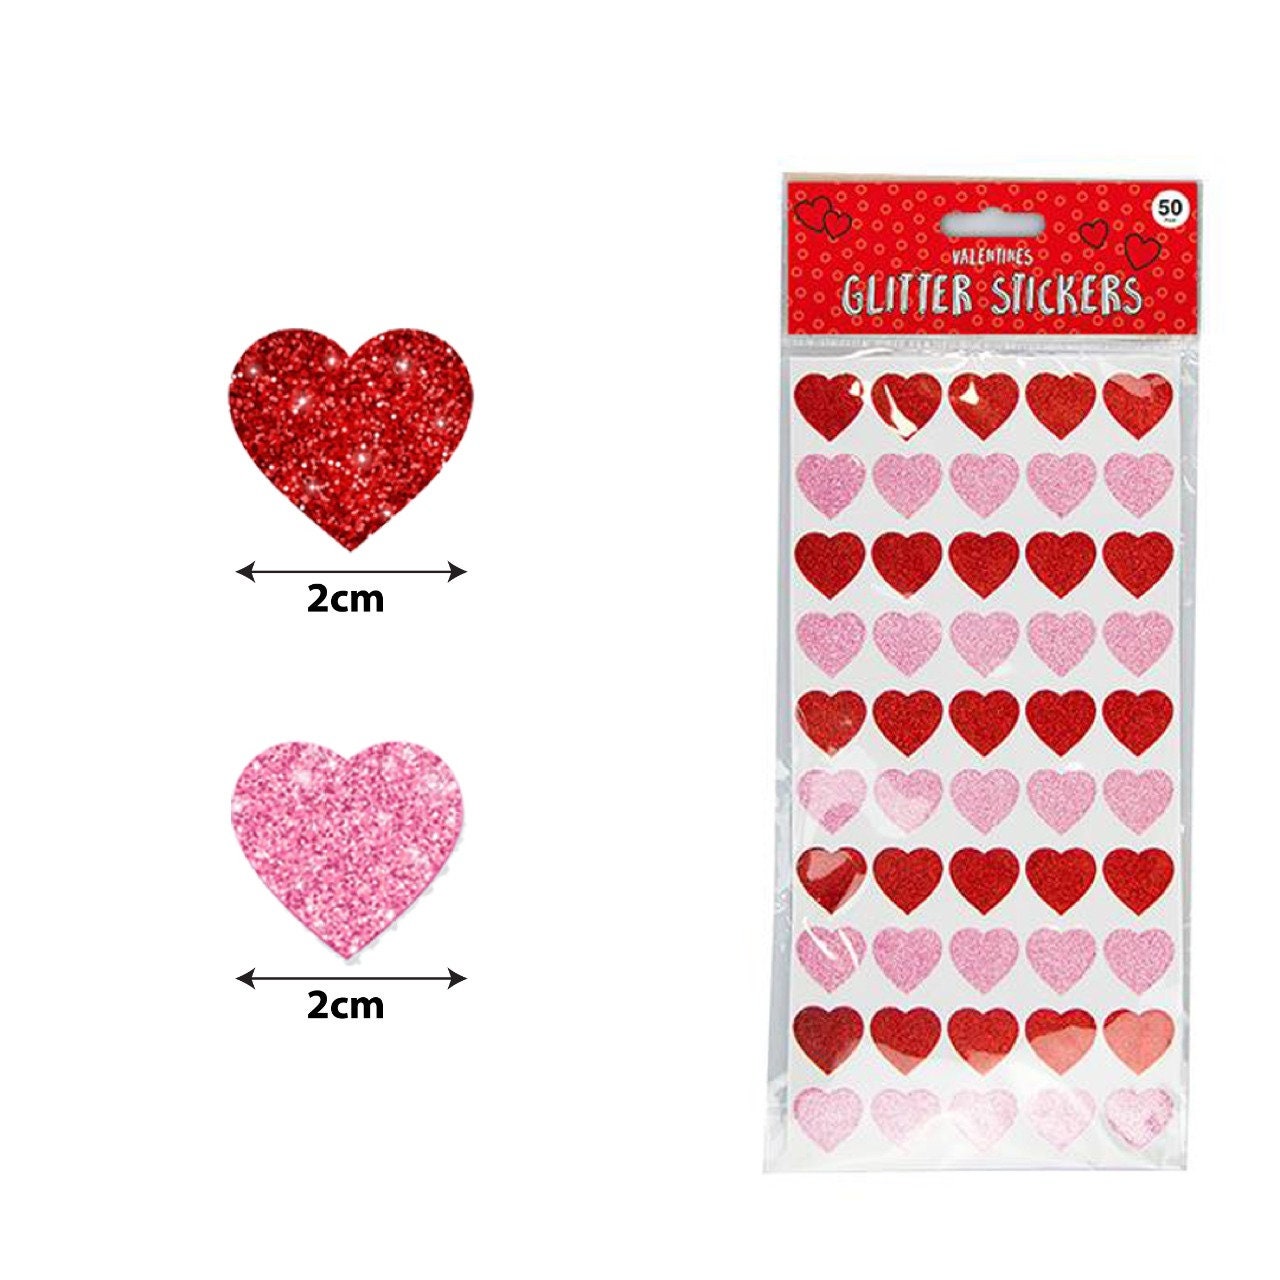 Mini Heart Planner Stickers Small Heart Stickers Tiny Planner